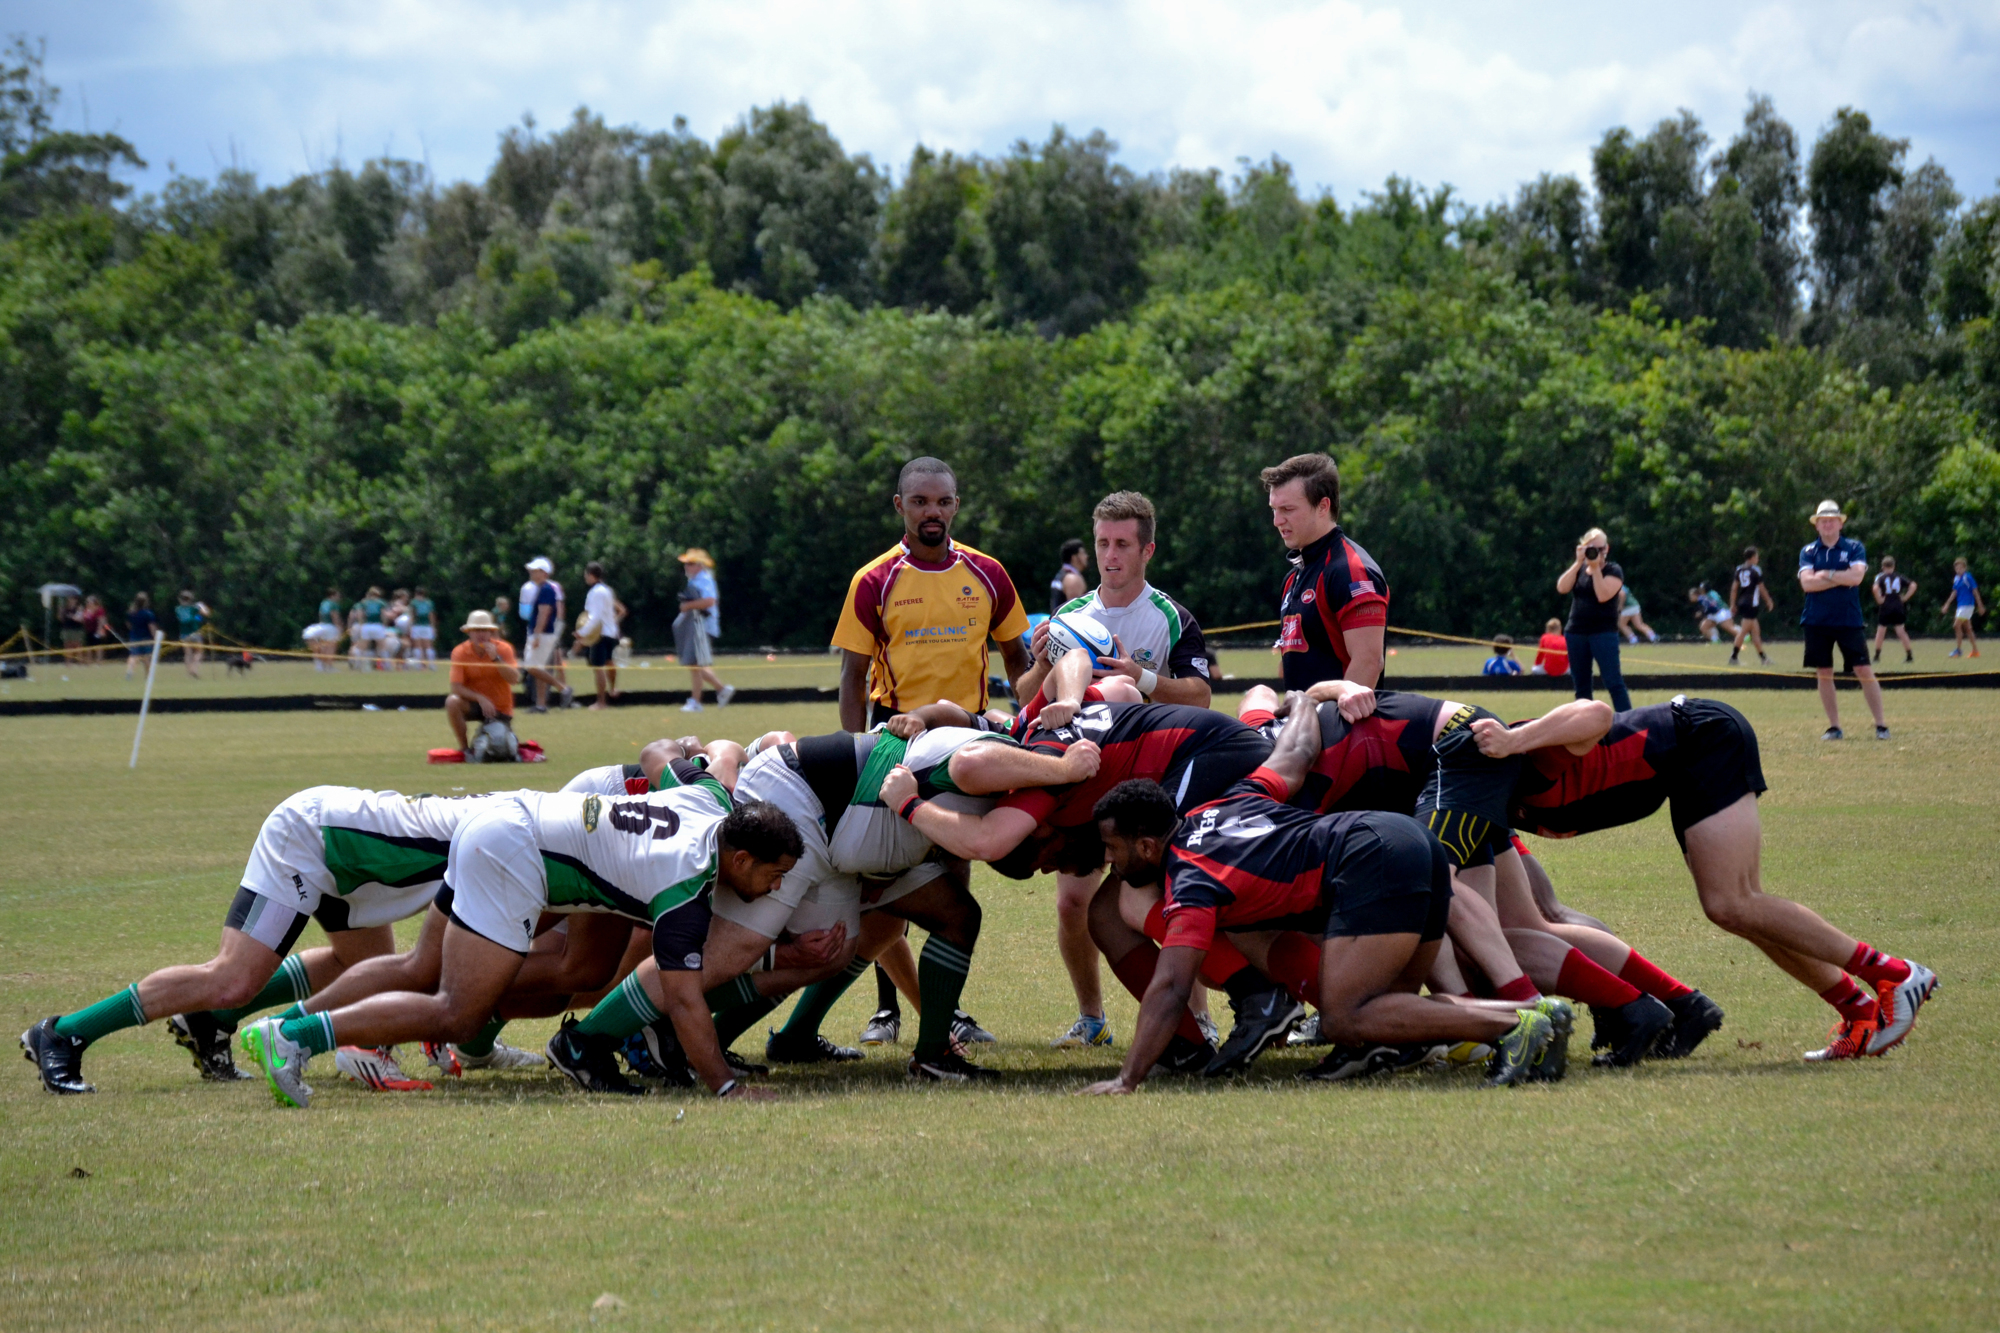 The Sarasota Surge Rugby Club and Gainesville Hogs get in a scrum. Courtesy photo.